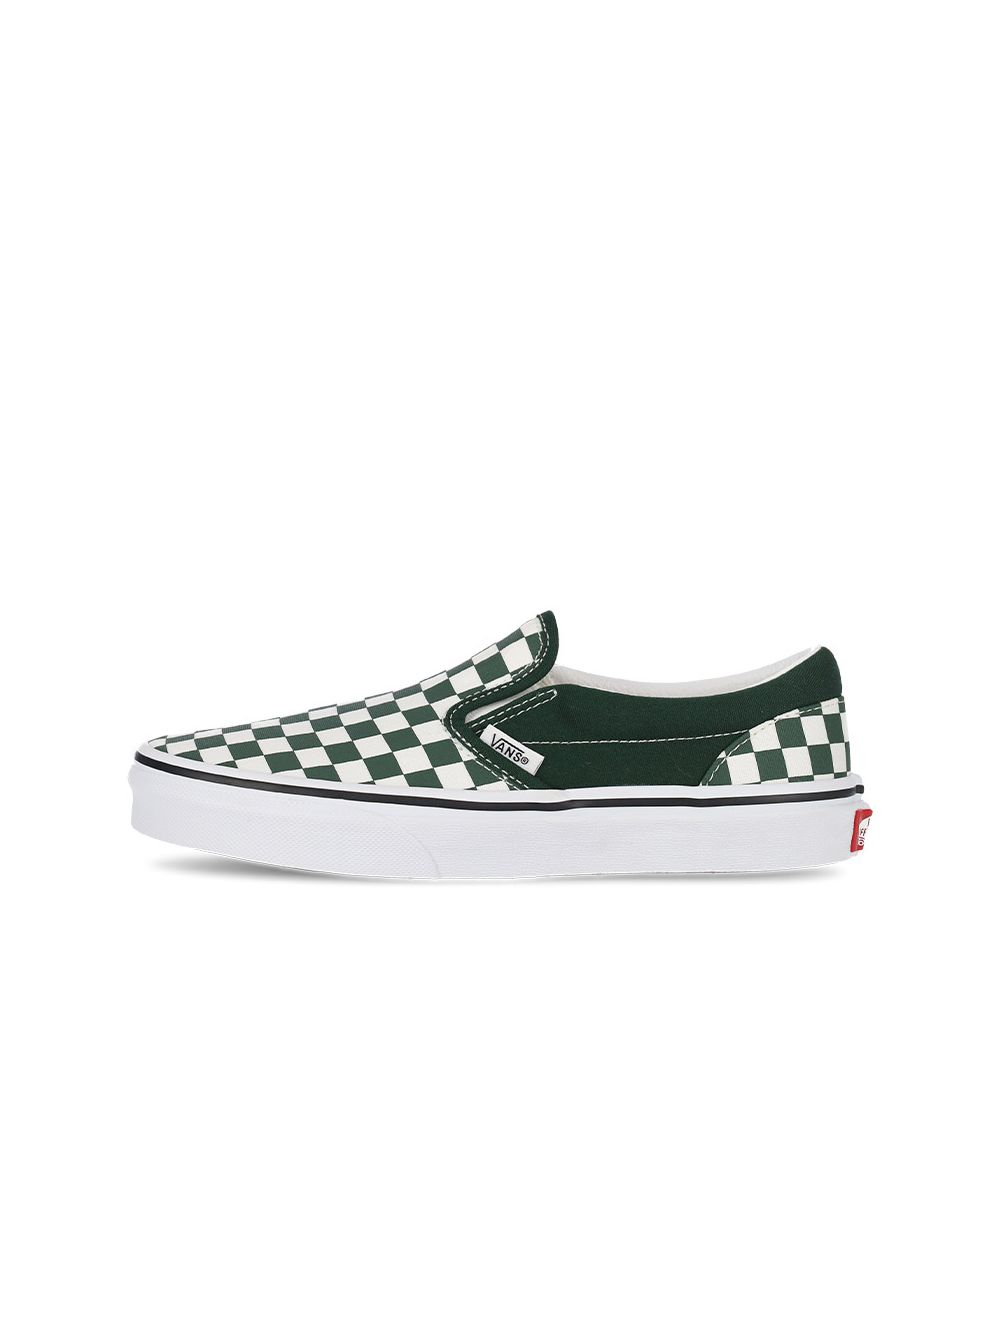 Shop Vans Classic Slip-On Youth Shoes Theory Mount View | Studio